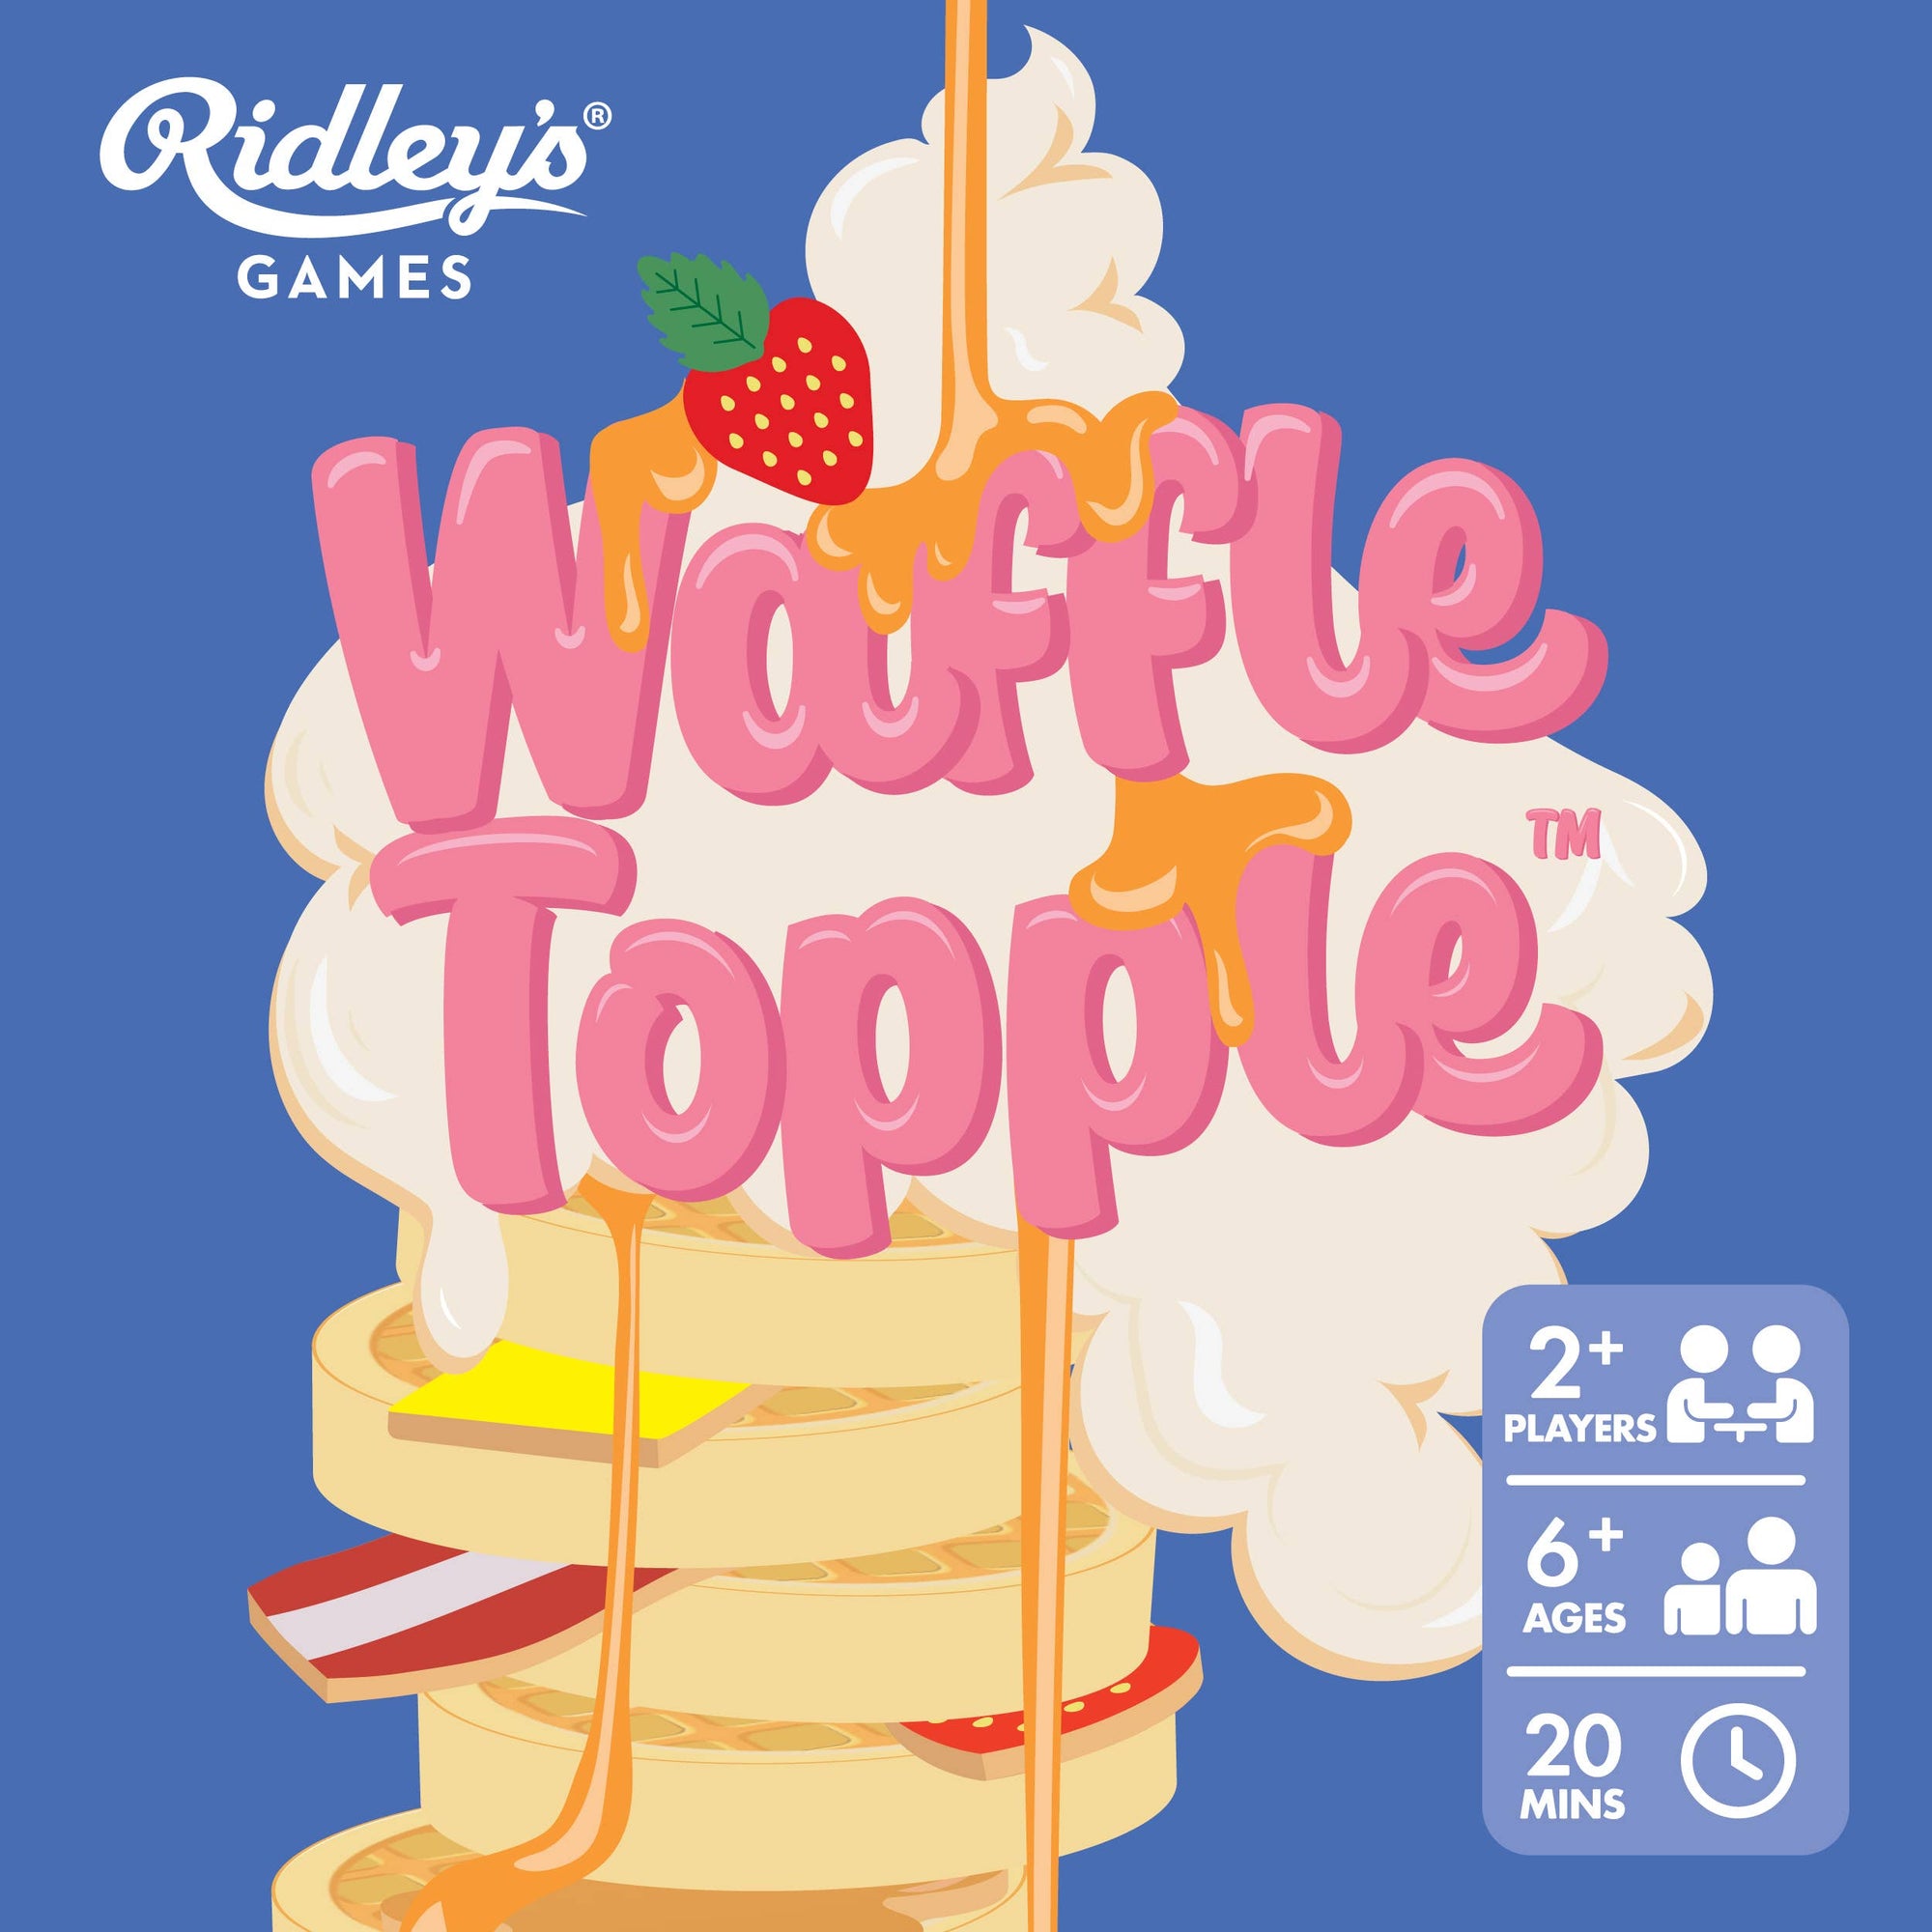 A box of Waffle Topple that challenges steady hands with waffles and topping pieces.